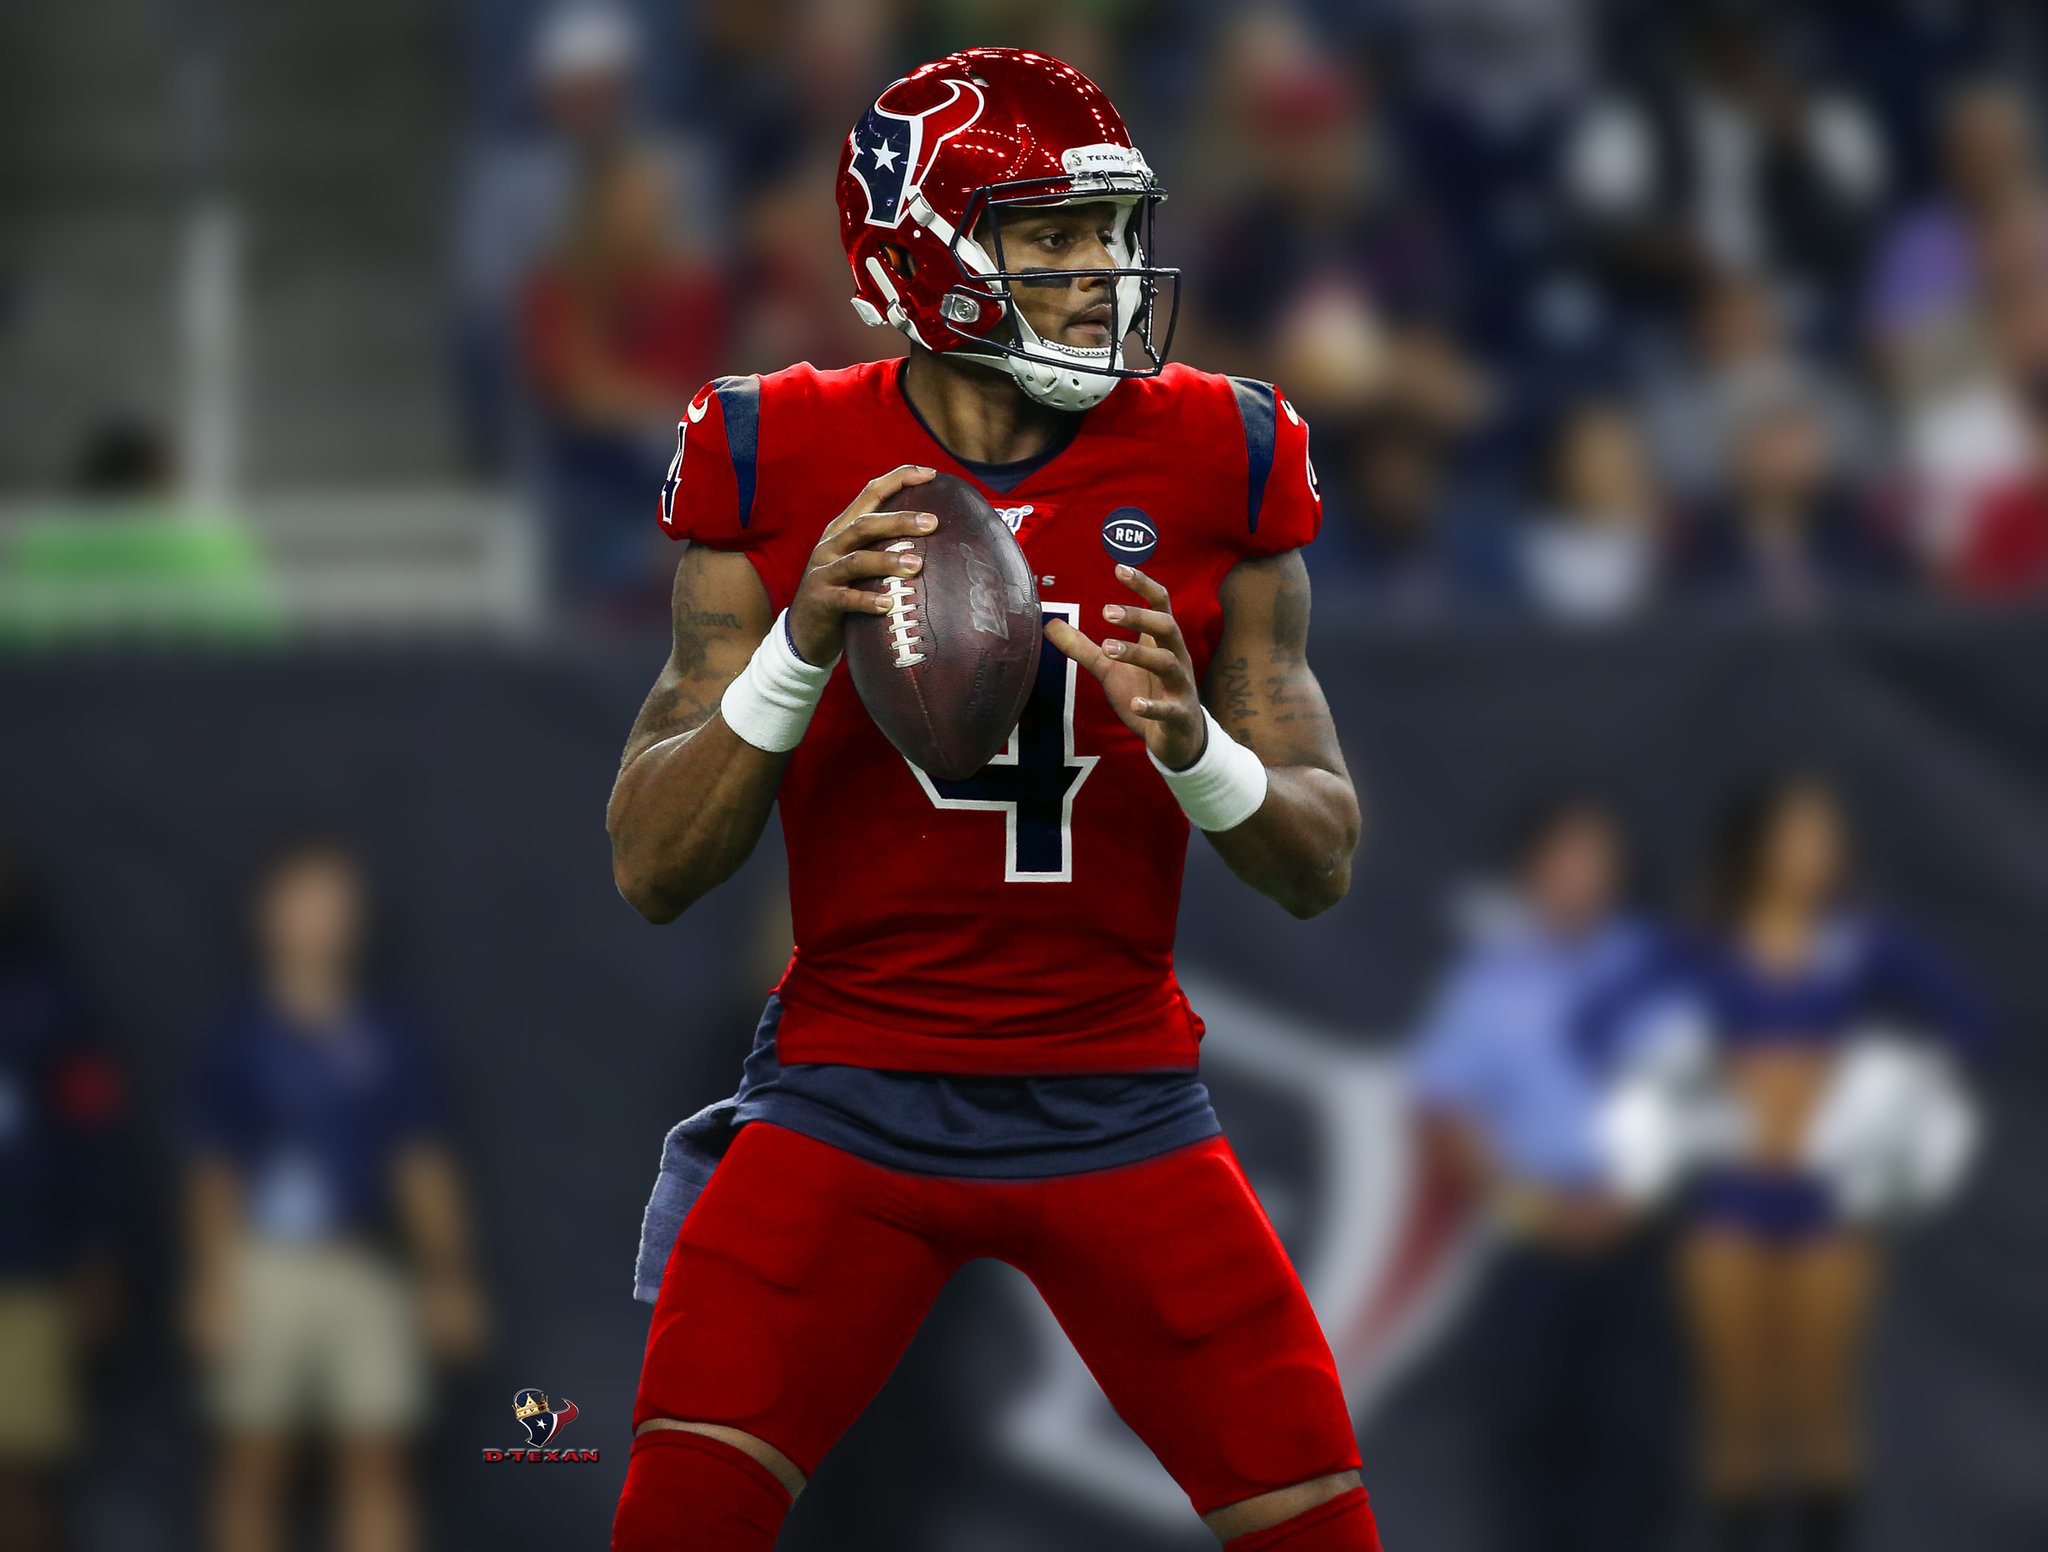 texans all red uniforms